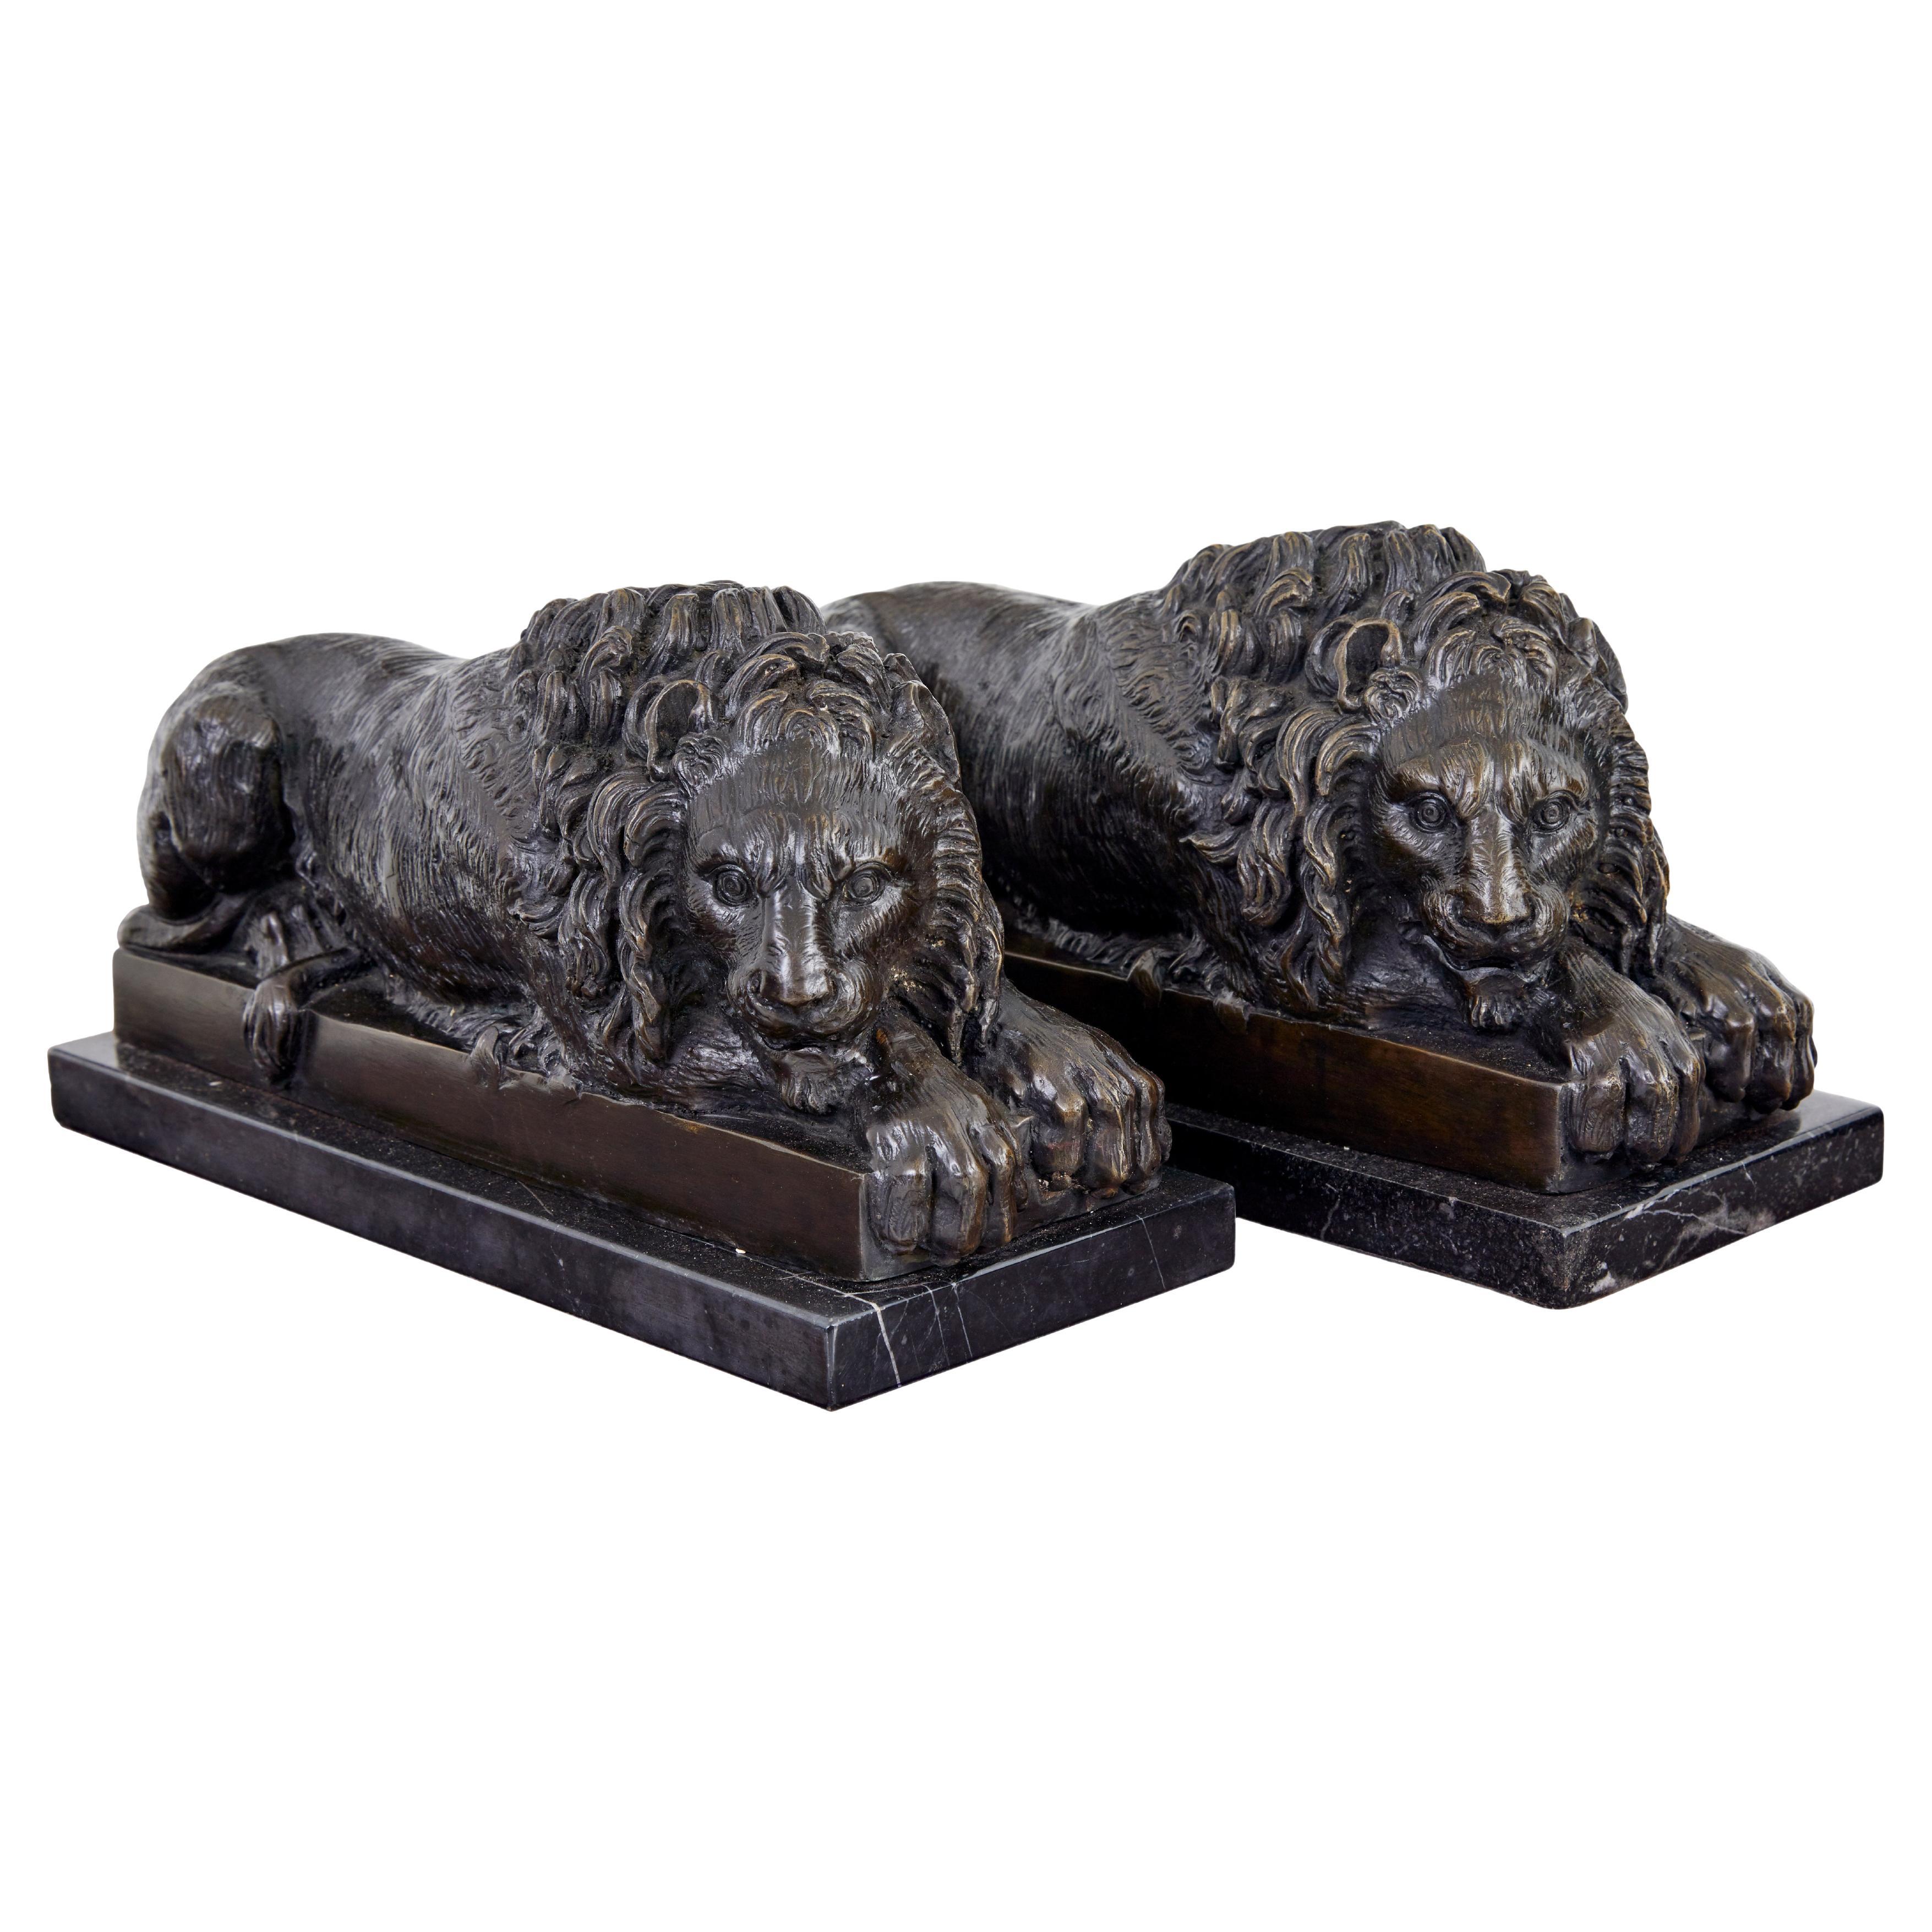 Pair of bronze and marble lion book ends